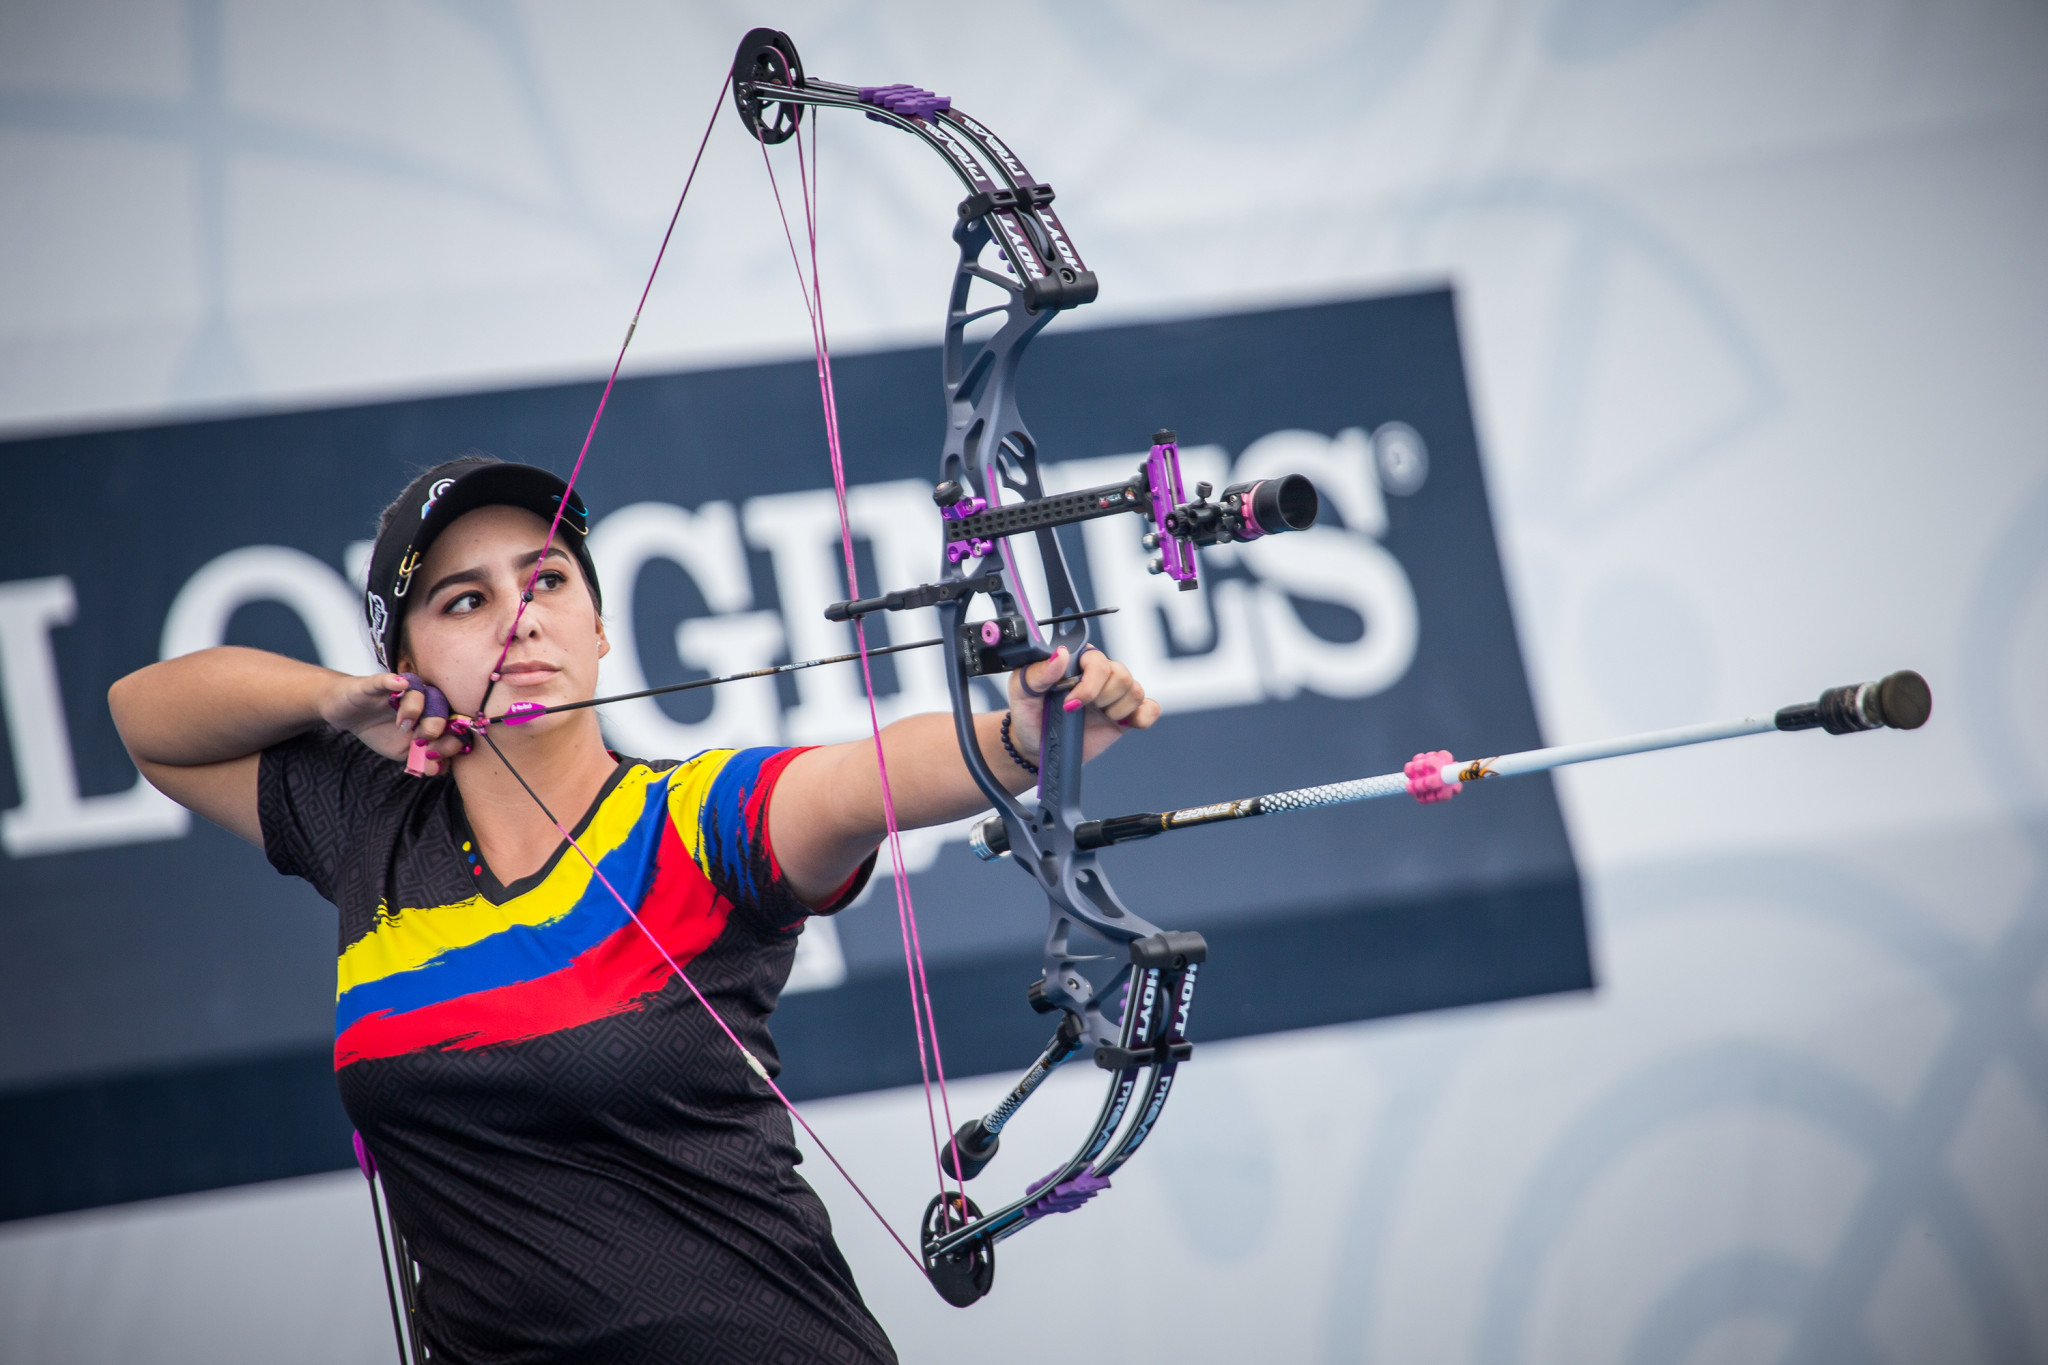 Sara Lopez of Colombia was the top qualifier in the women's compound discipline at the Pan American Archery Championships ©Getty Images